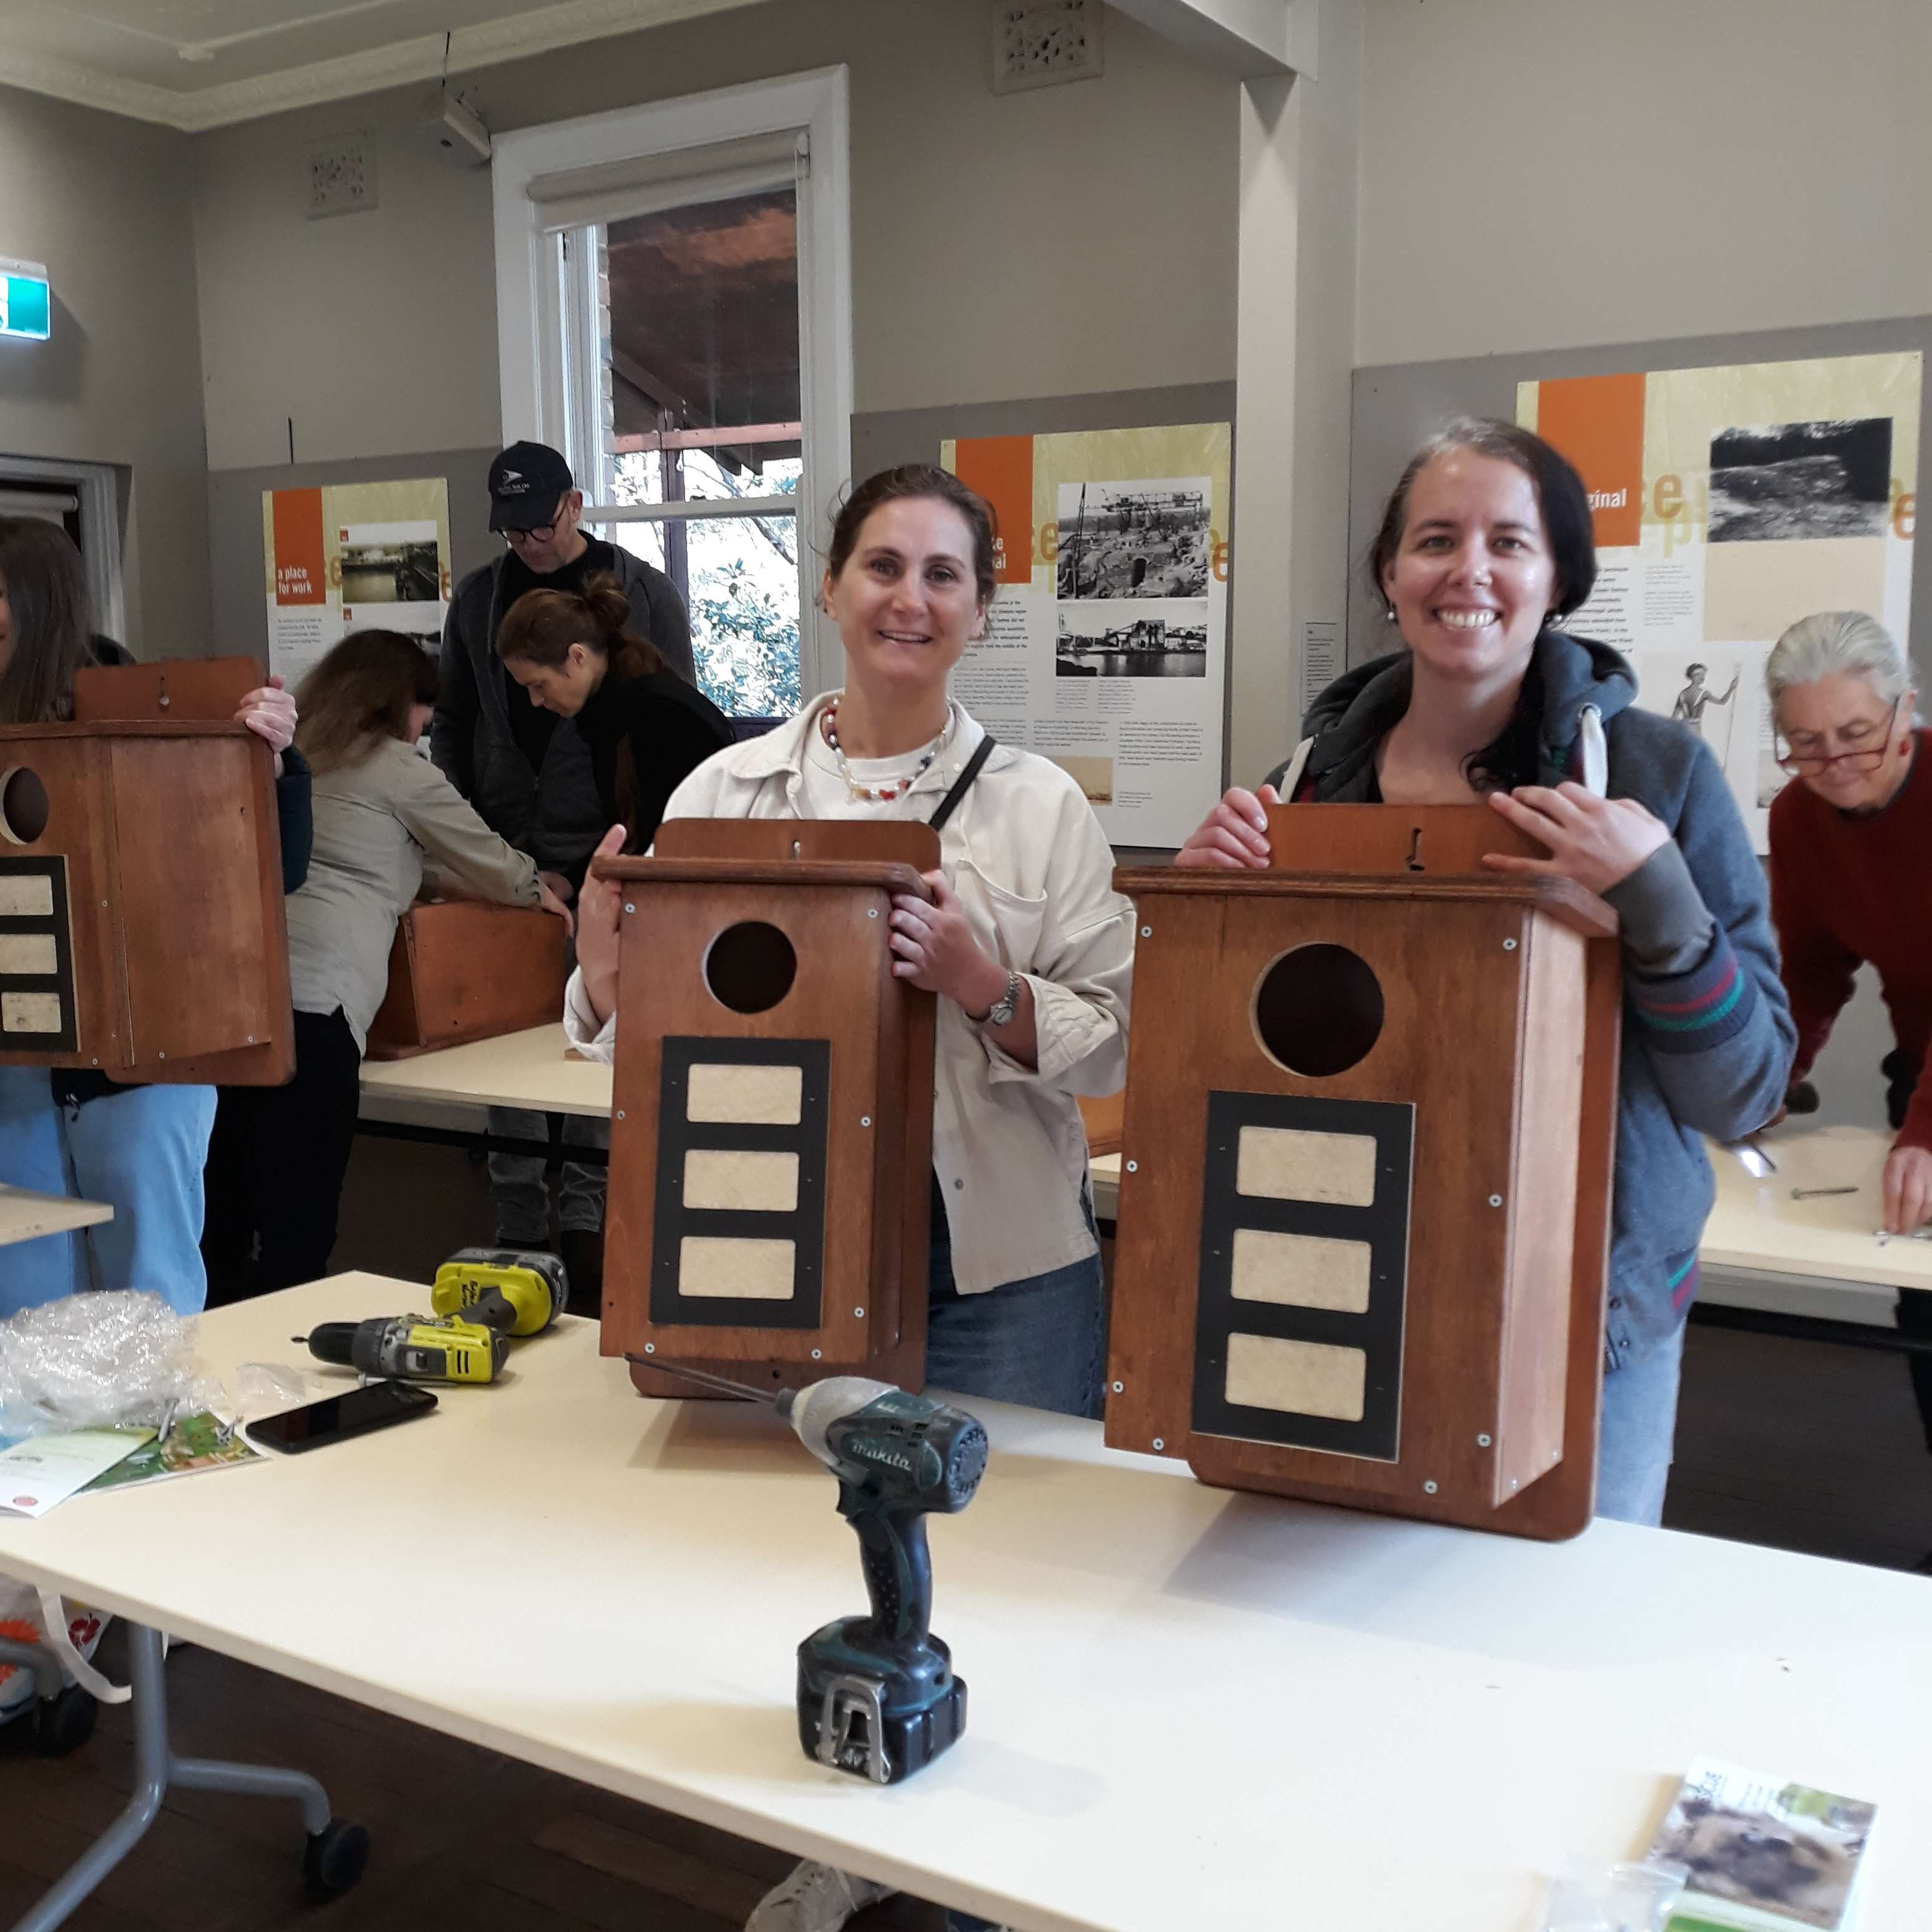 Workshop participants with prefabricated nestboxes